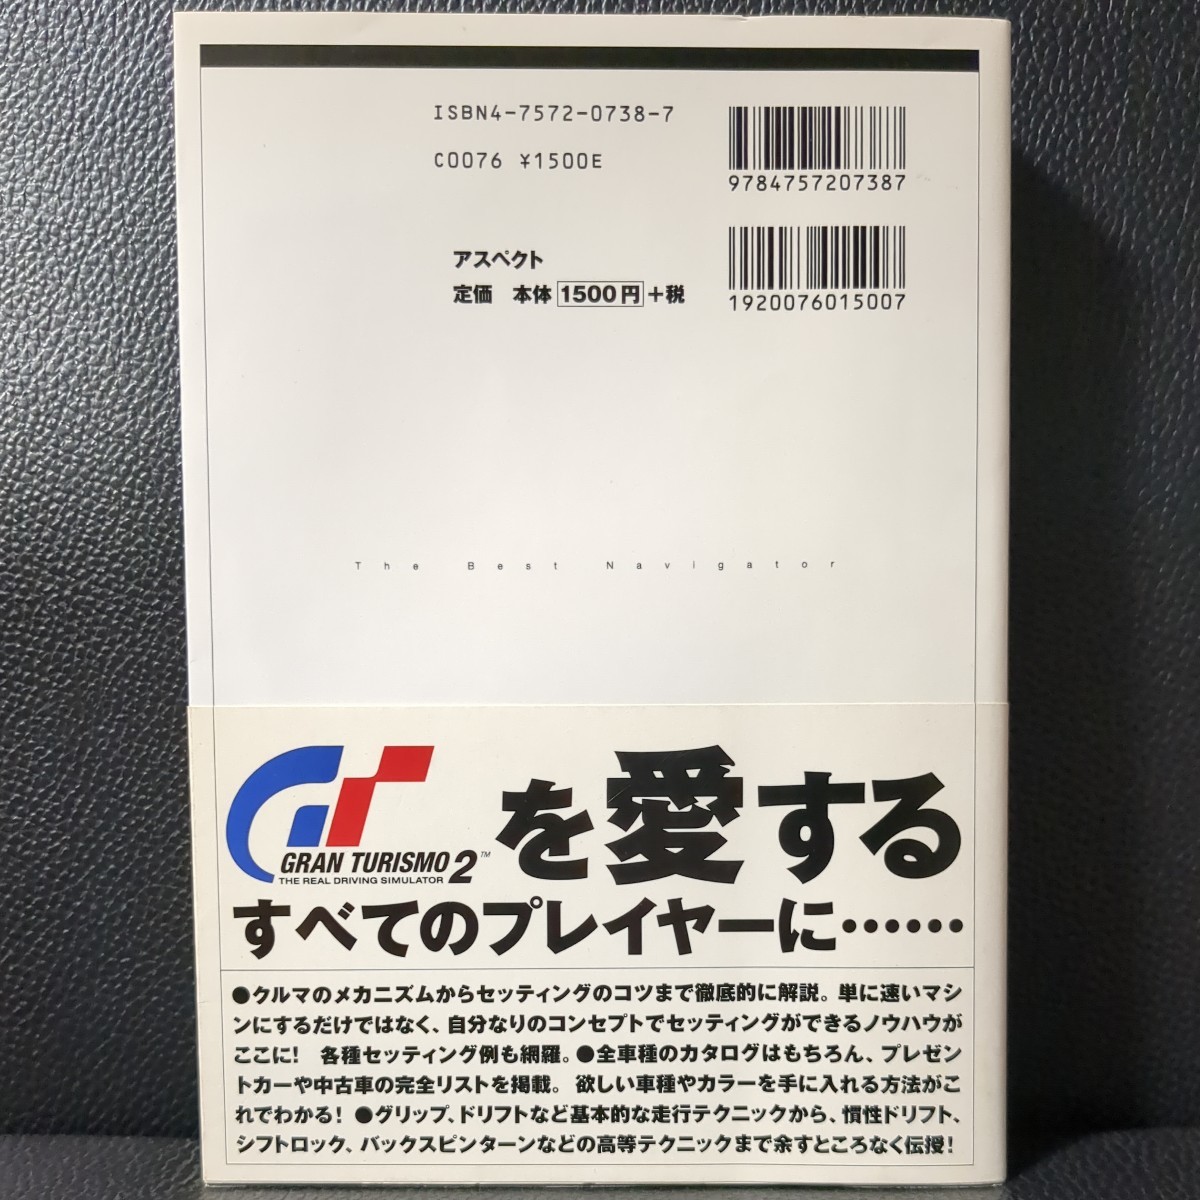 [ beautiful goods * with belt ] gran turismo 2 official guidebook GRAN TURISMO Fami expert capture book Sony PlayStation SONY PlayStation PS1